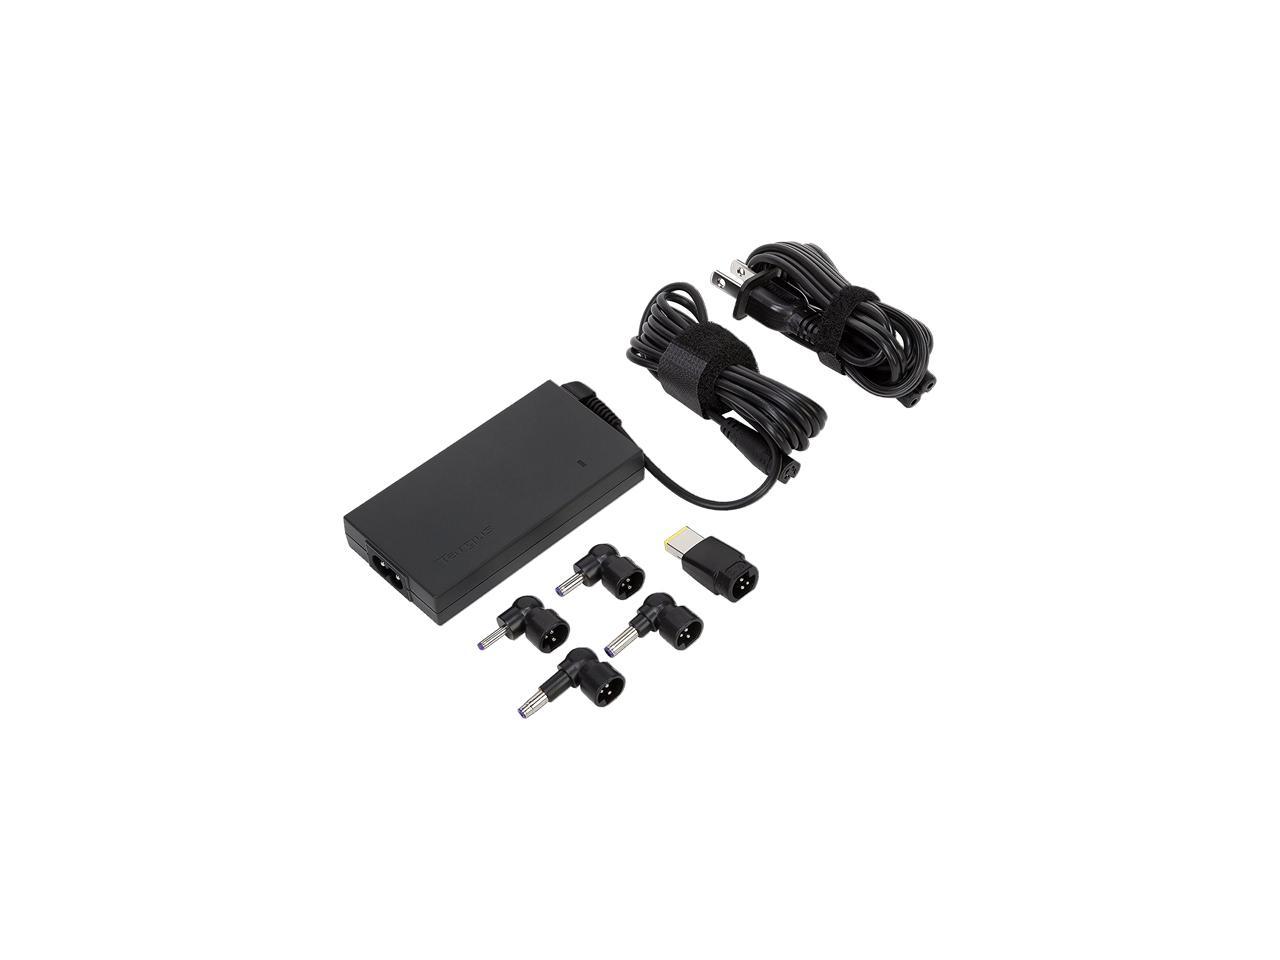 Targus 65W AC Ultra-Slim Universal Laptop Charger with 5 Tips